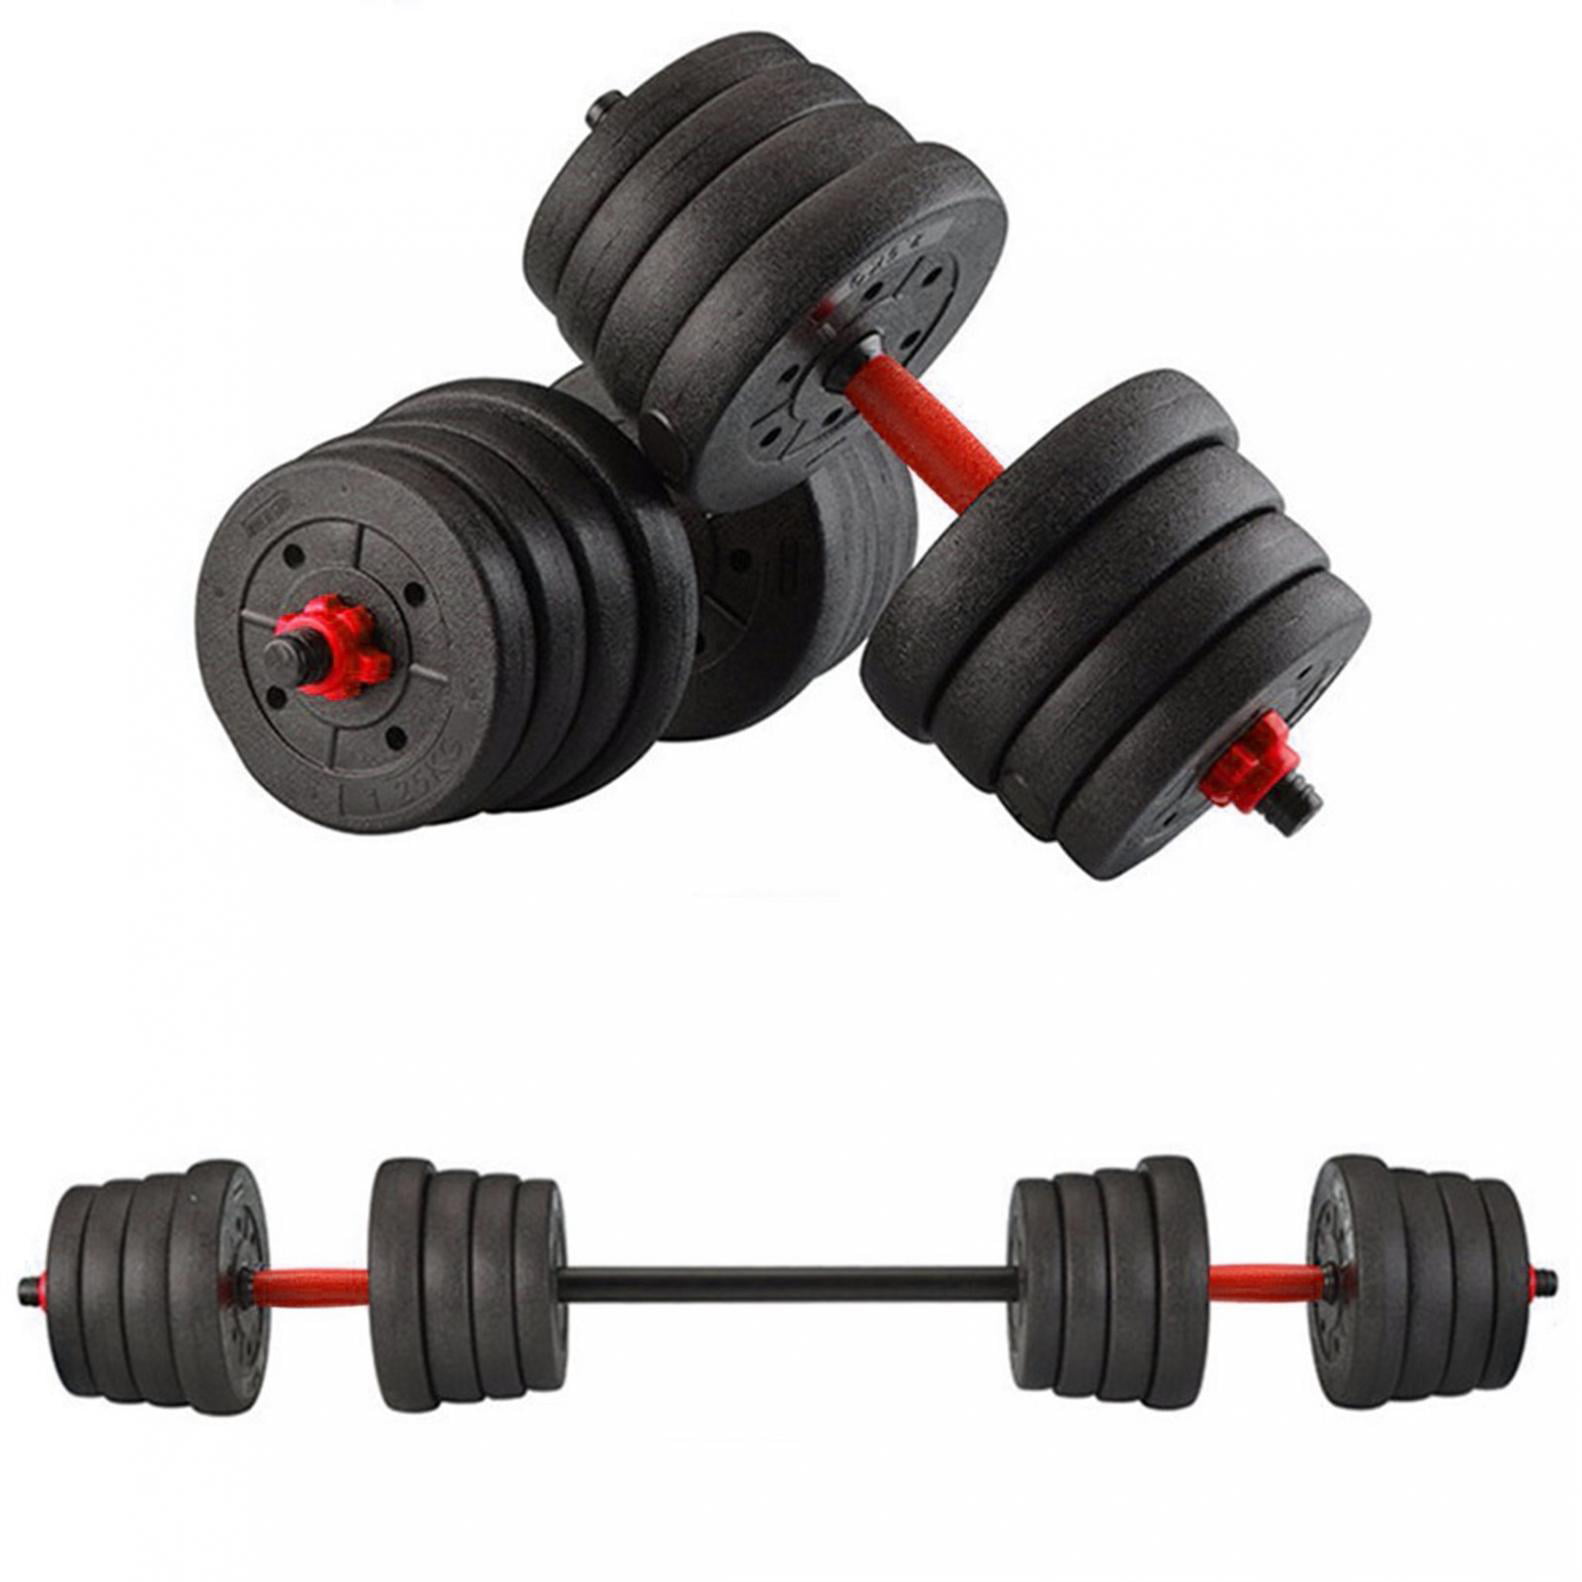 Details about   Barbell Dumbbell Set 2 Pcs Neoprene Weight Lifting Home Workout Exercise Fitness 